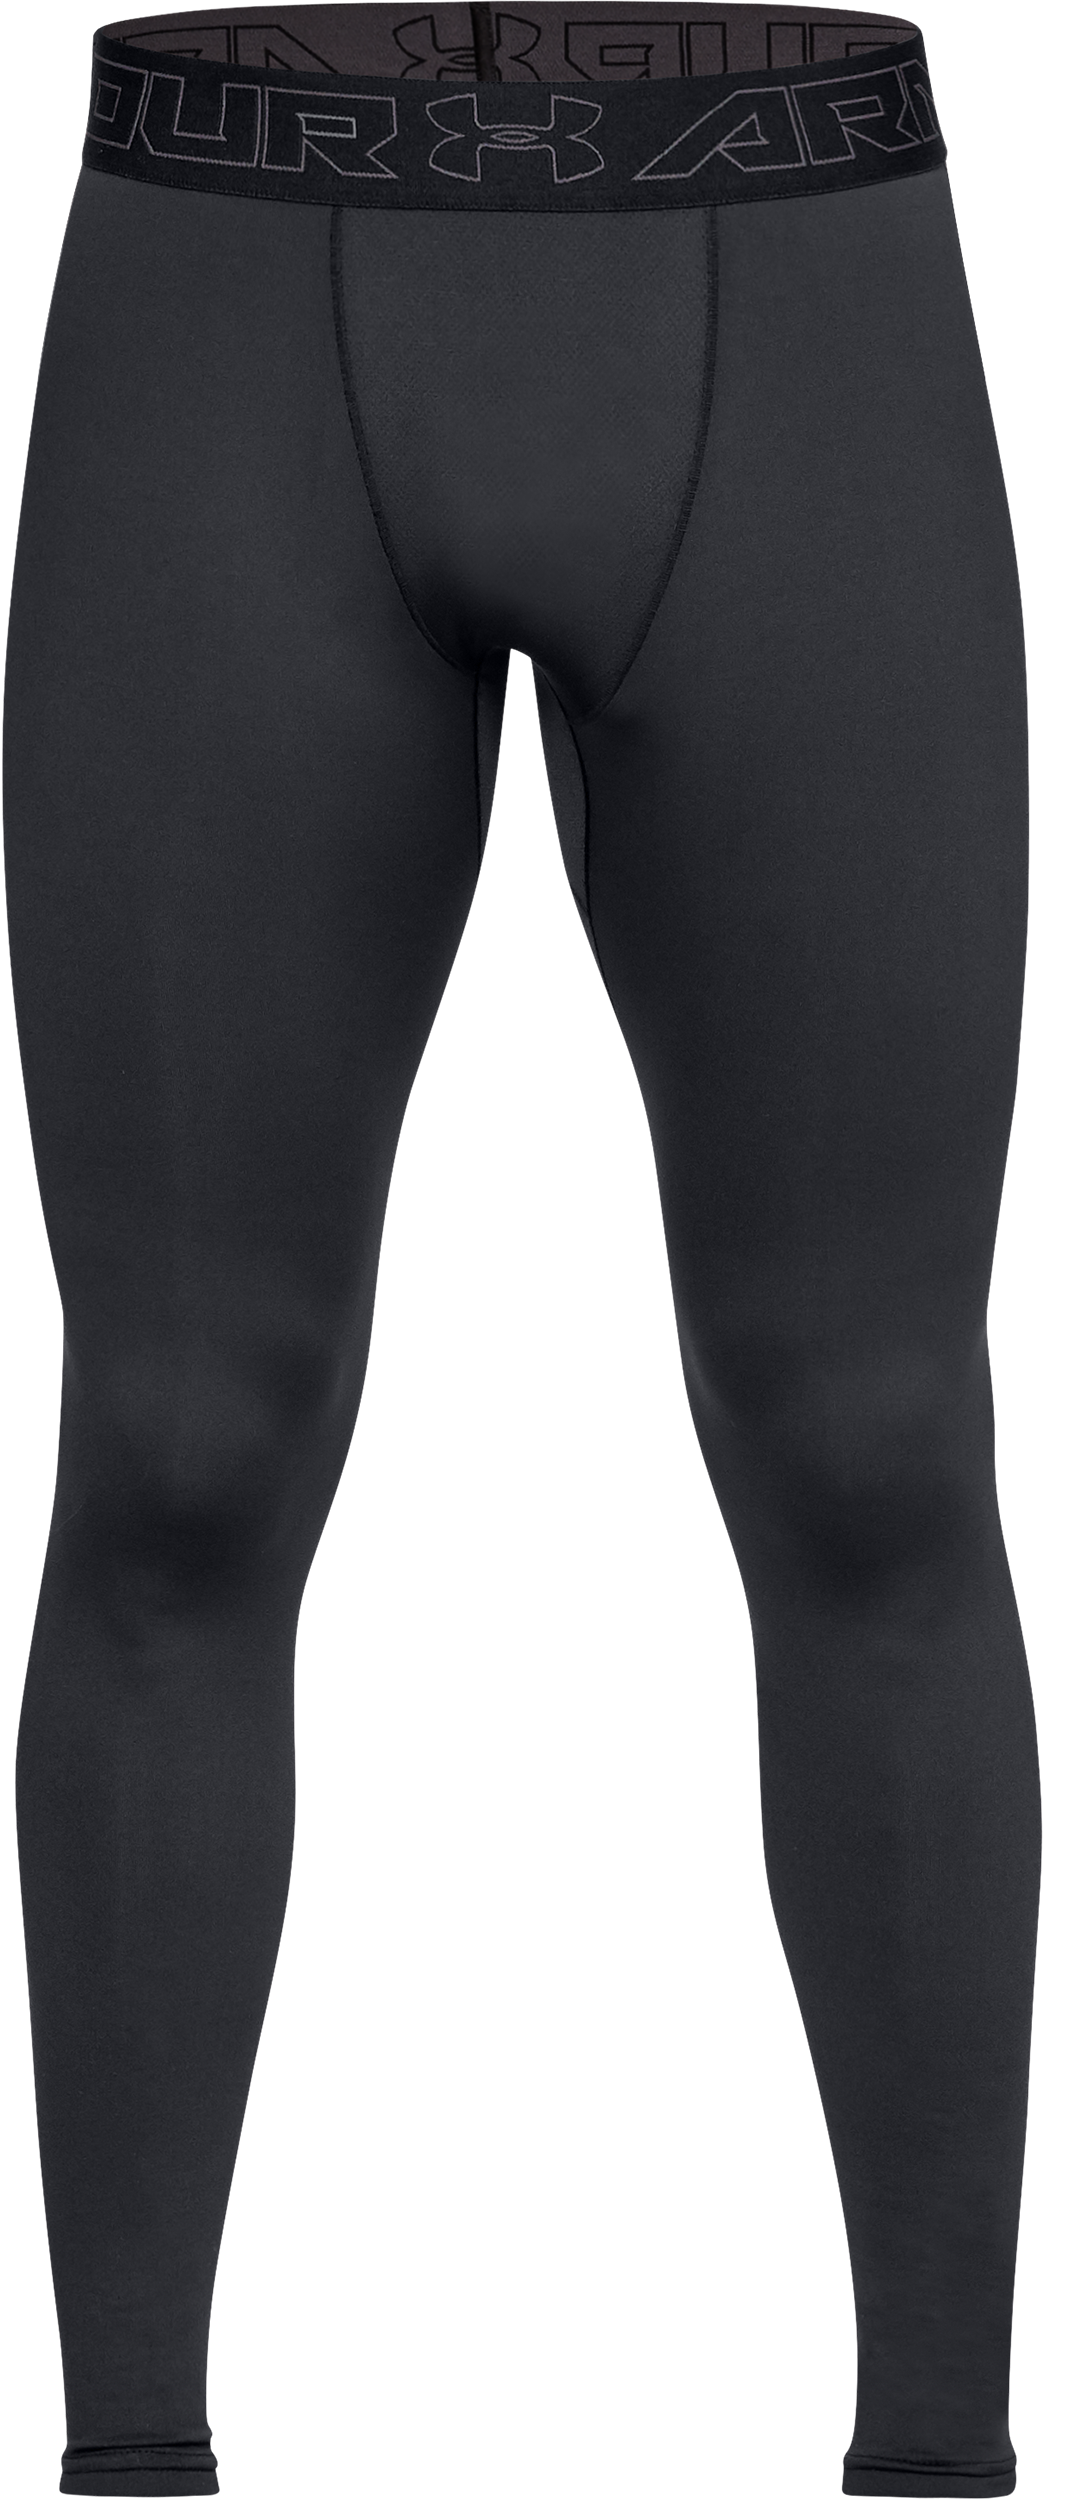 Under Armour Cold Gear Mens Compression Leggings (Black-Charcoal)